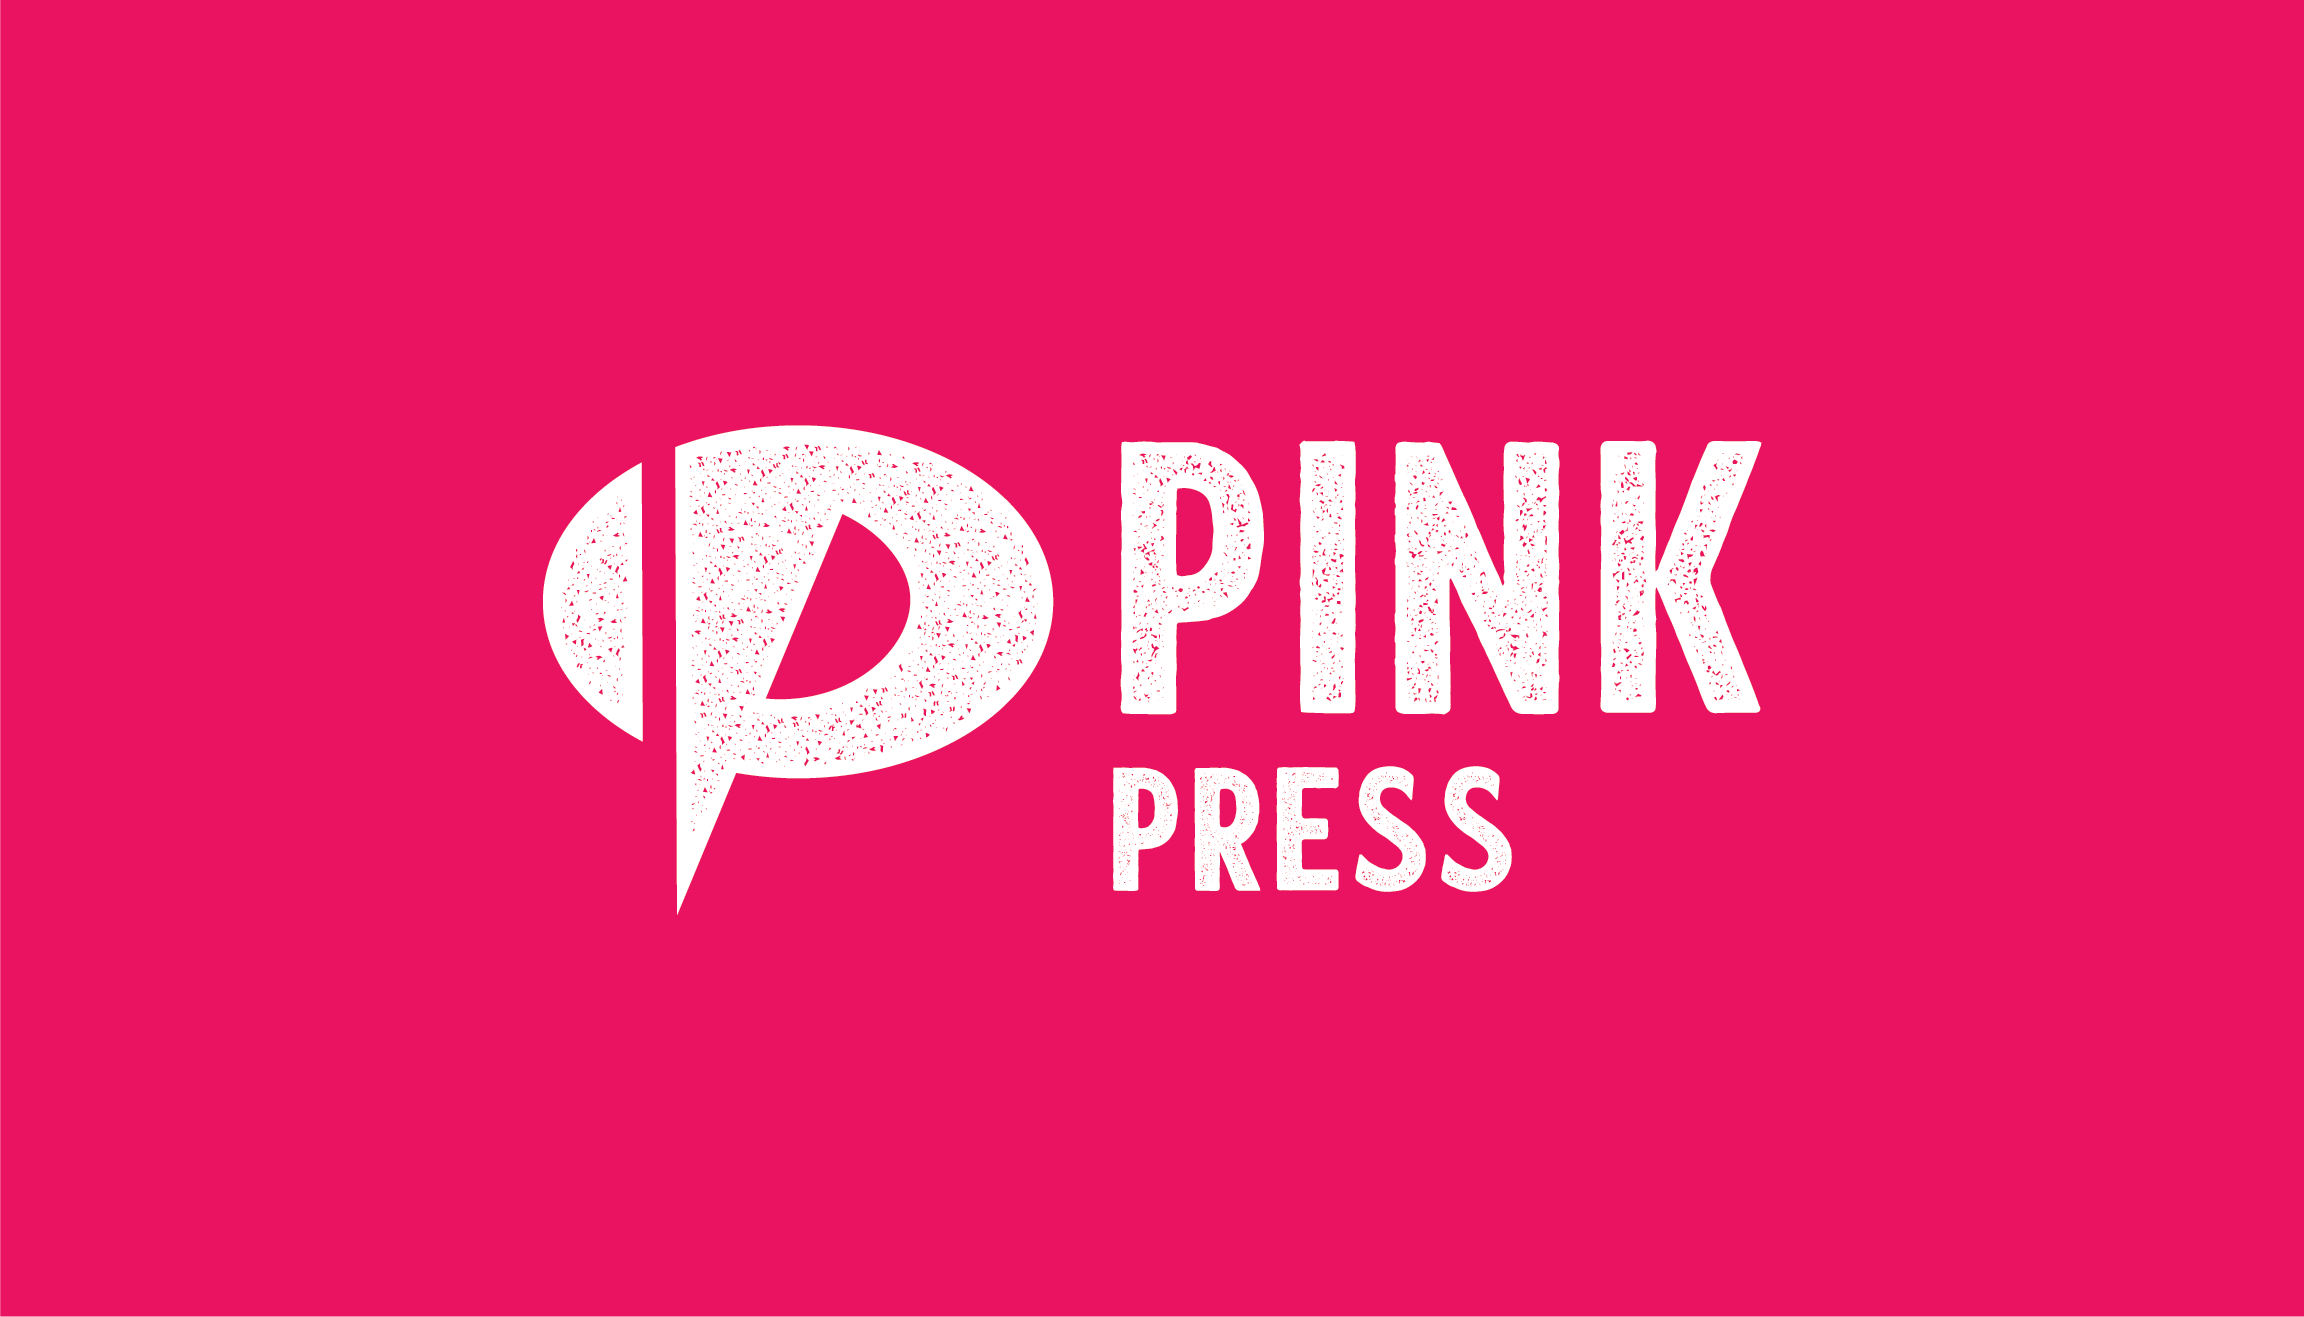 As a collection of zines, the Pink Press features work about a variety of themes, in different formats, authored by different zinesters. Using this pink brand identity and logo helps to tie all this diversity together visually.